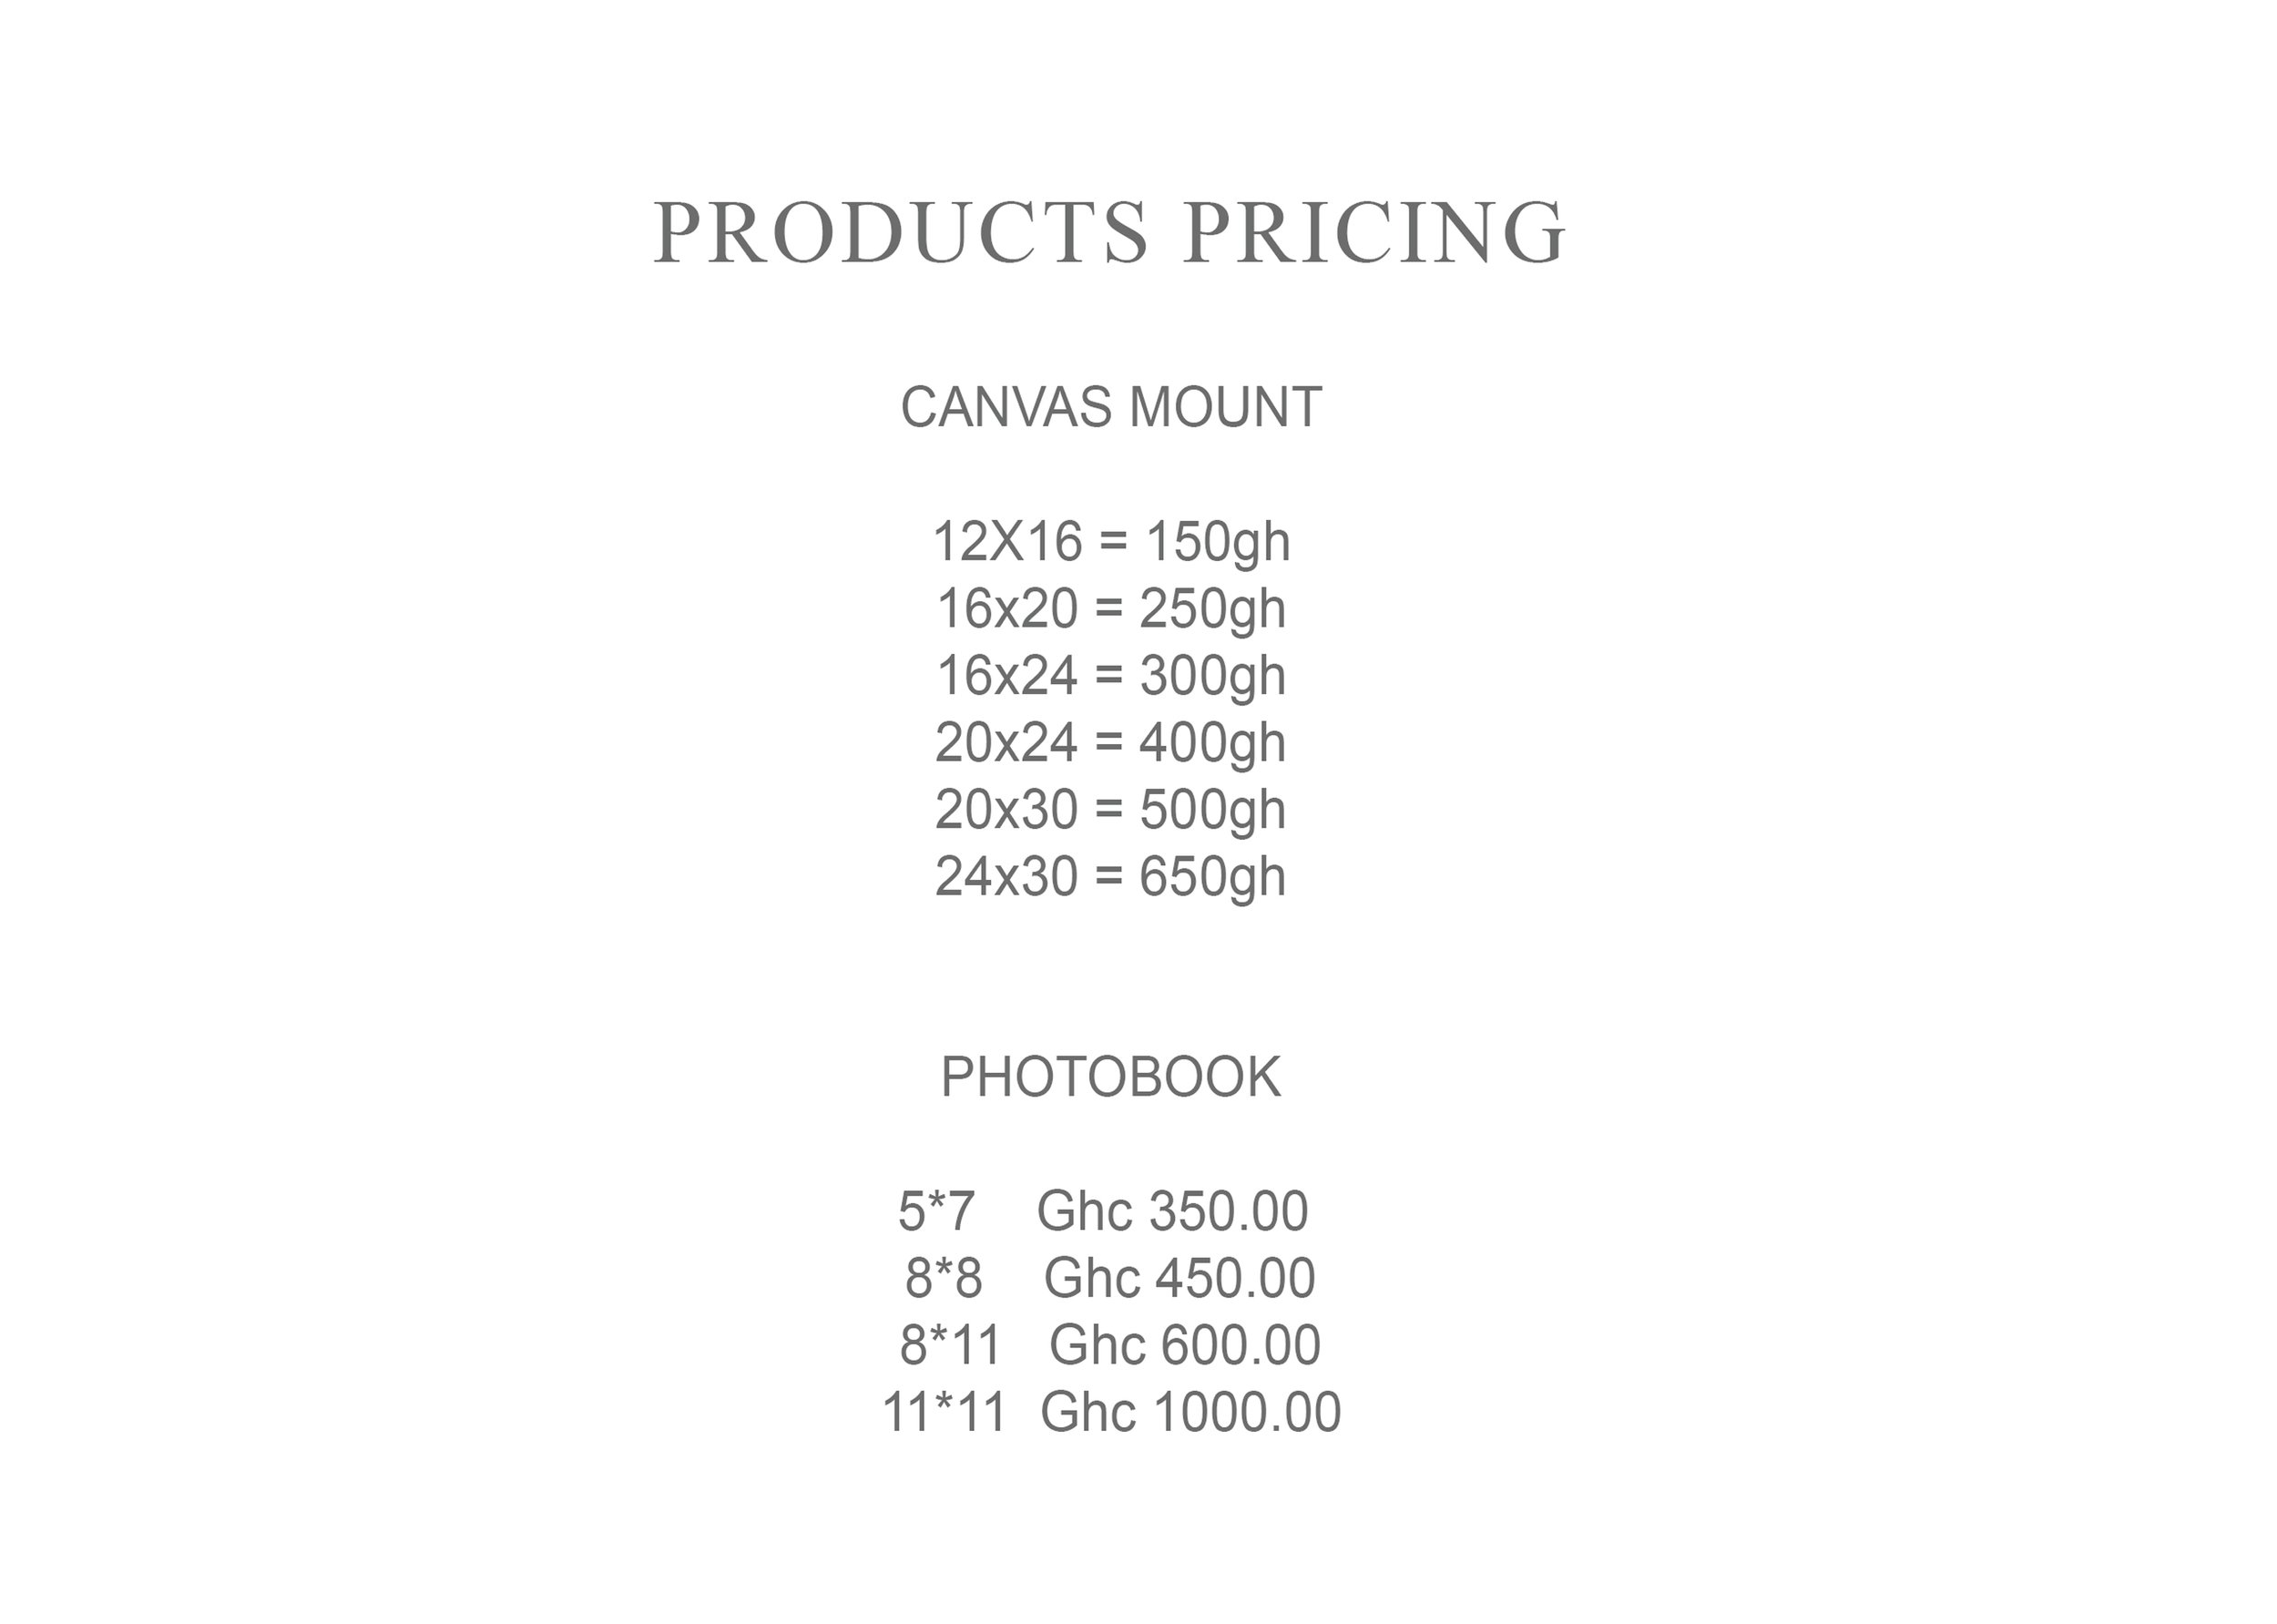 PRODUCTS-PRICING.jpg